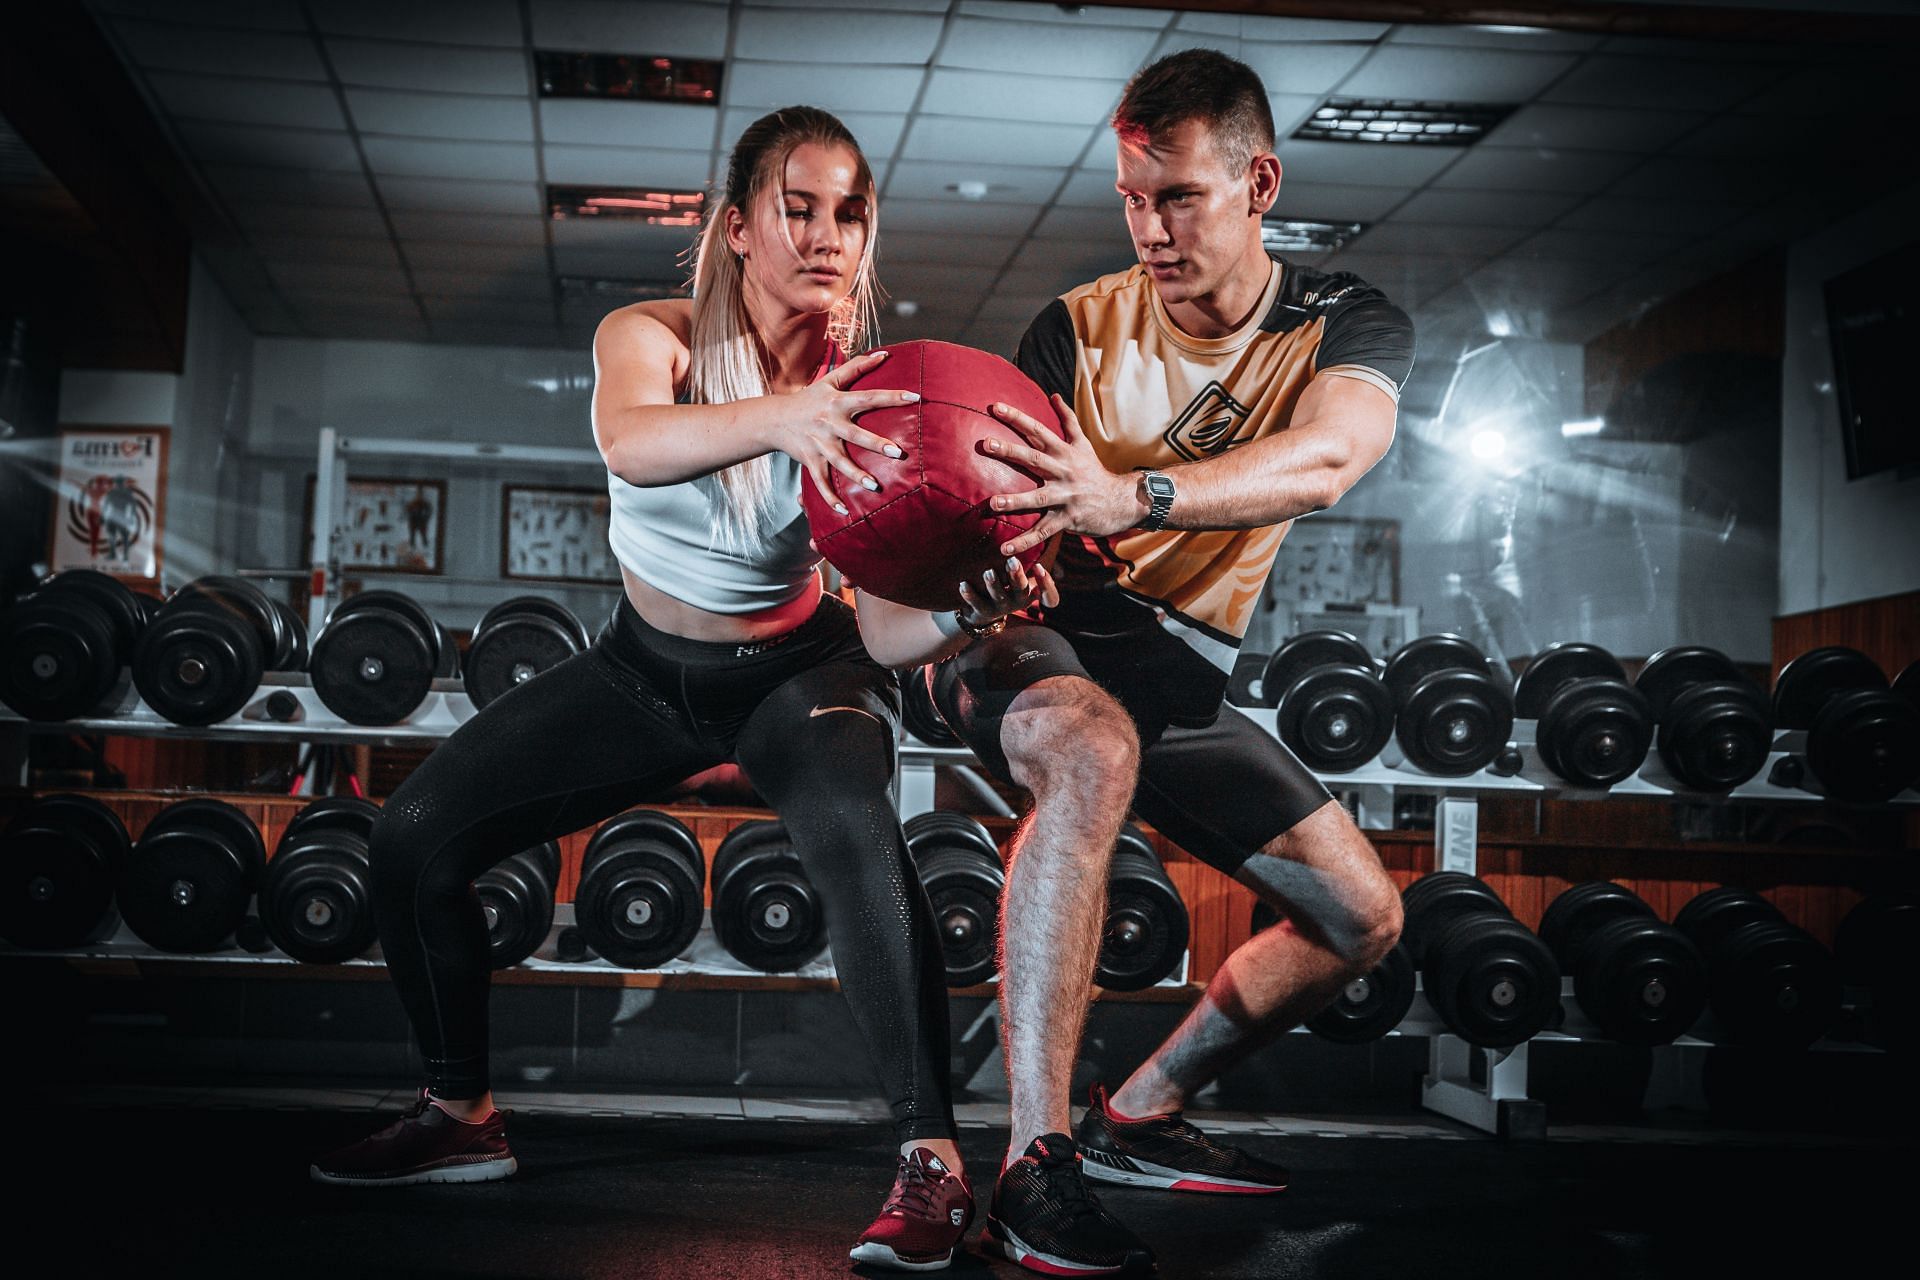 You can do medicine ball squats with a heavy ball, but you can also use a lighter weight. (Image via Pexels/ Andrej Klintsy)